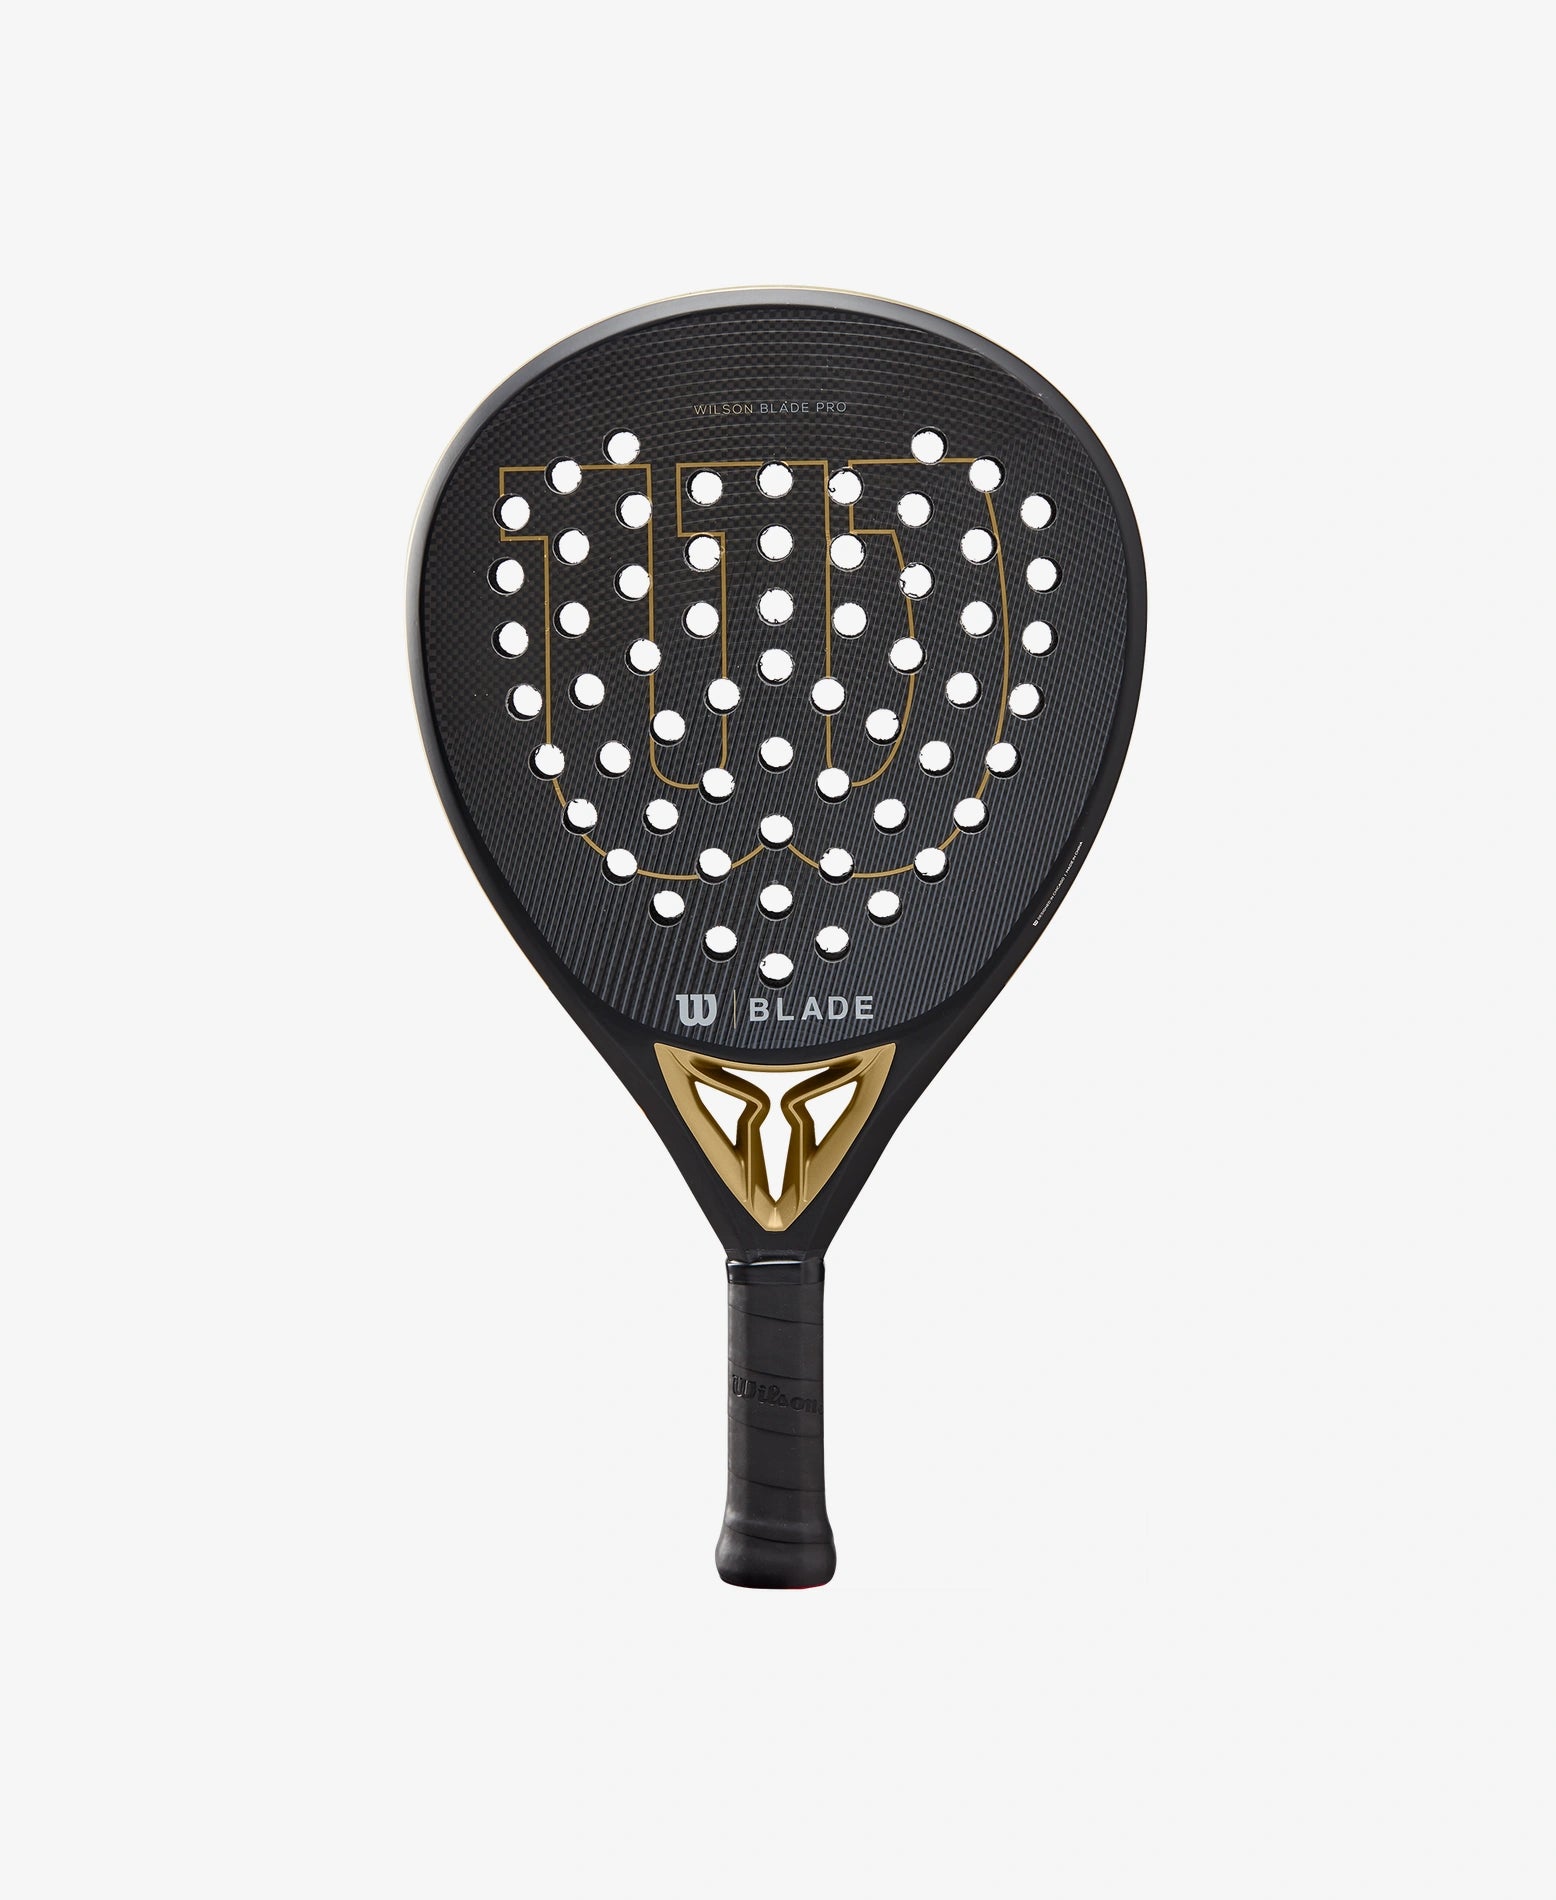 The Wilson Blade Pro V2 Padel Racket in gold colour which is available for sale at GSM Sports.  